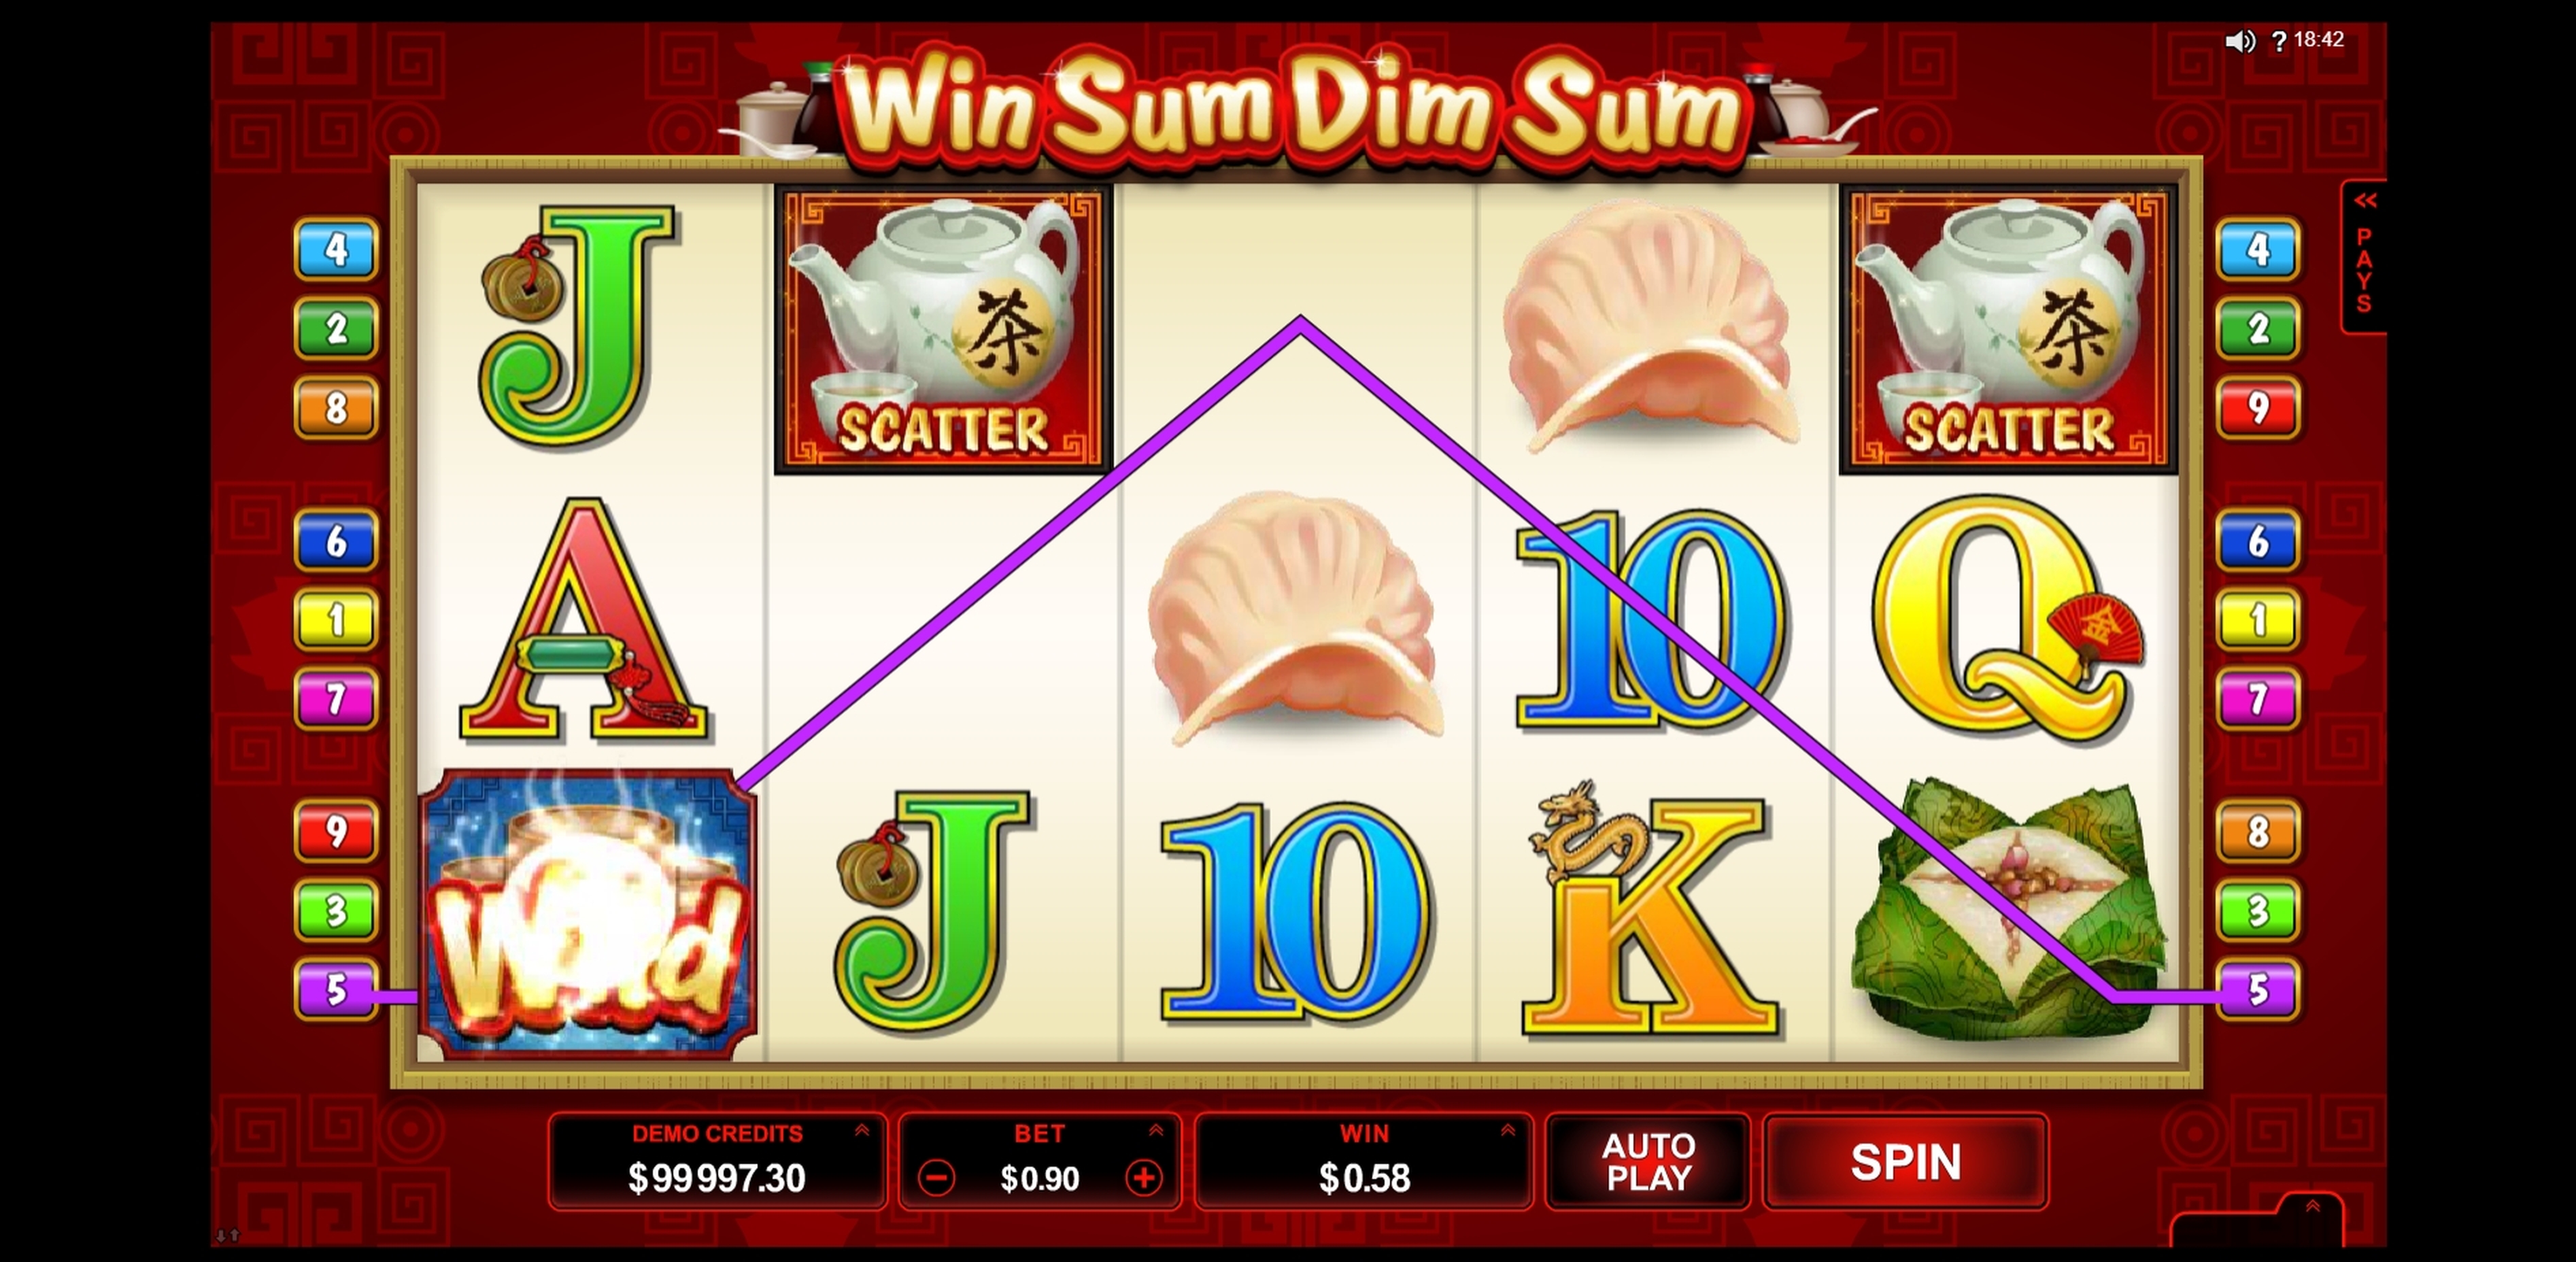 Win Money in Win Sum Dim Sum Free Slot Game by Microgaming